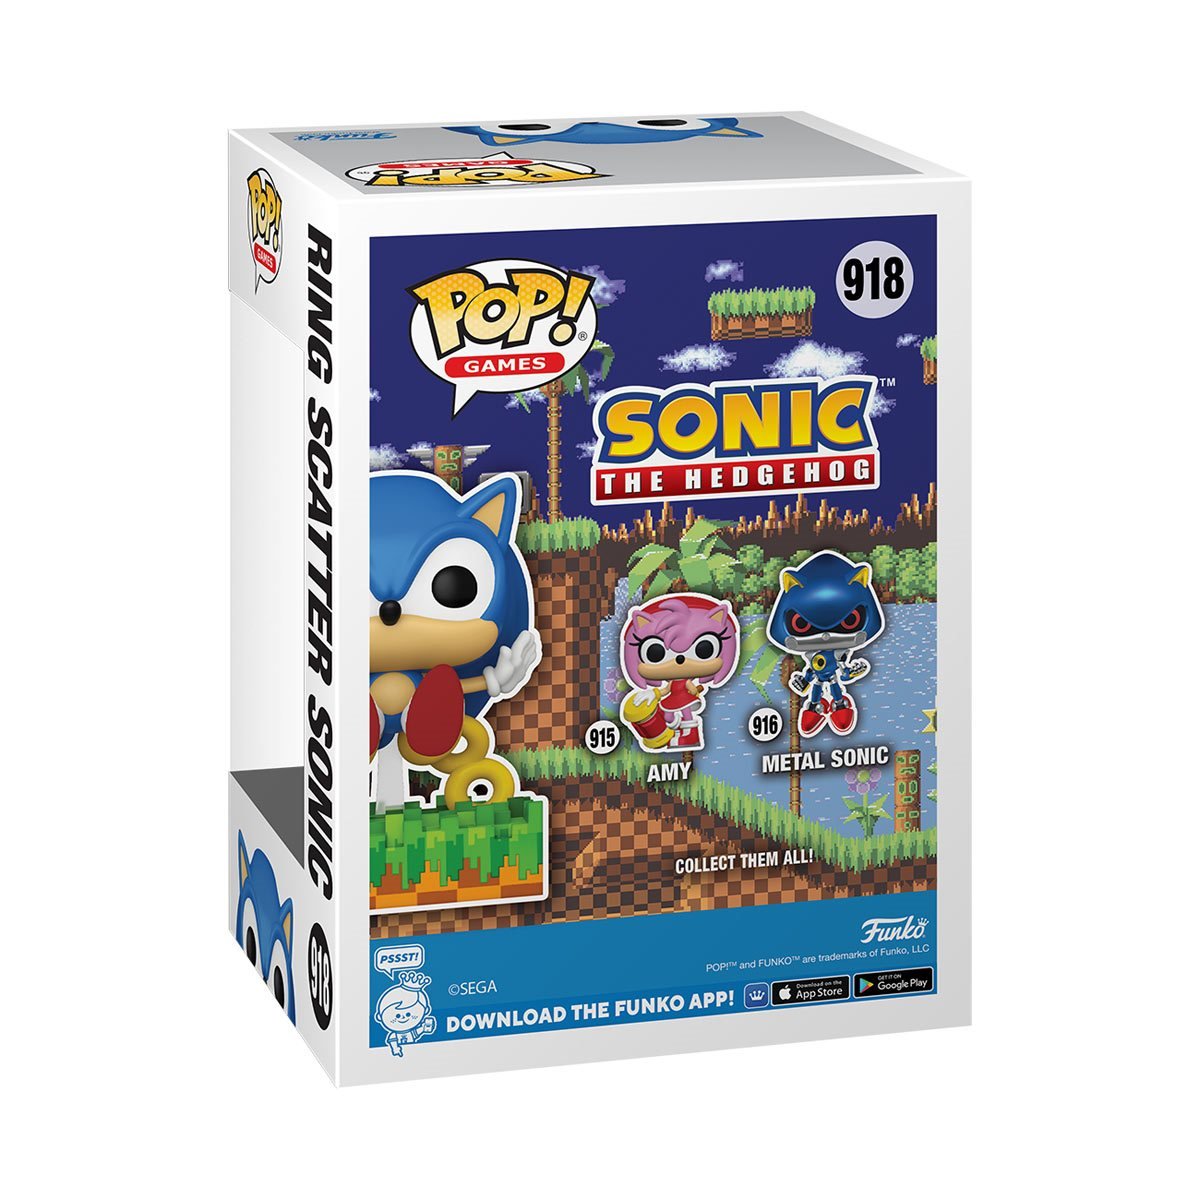 Sonic the Hedgehog Ring Scatter Sonic Funko Pop! Vinyl Figure #918 -  Previews Exclusive